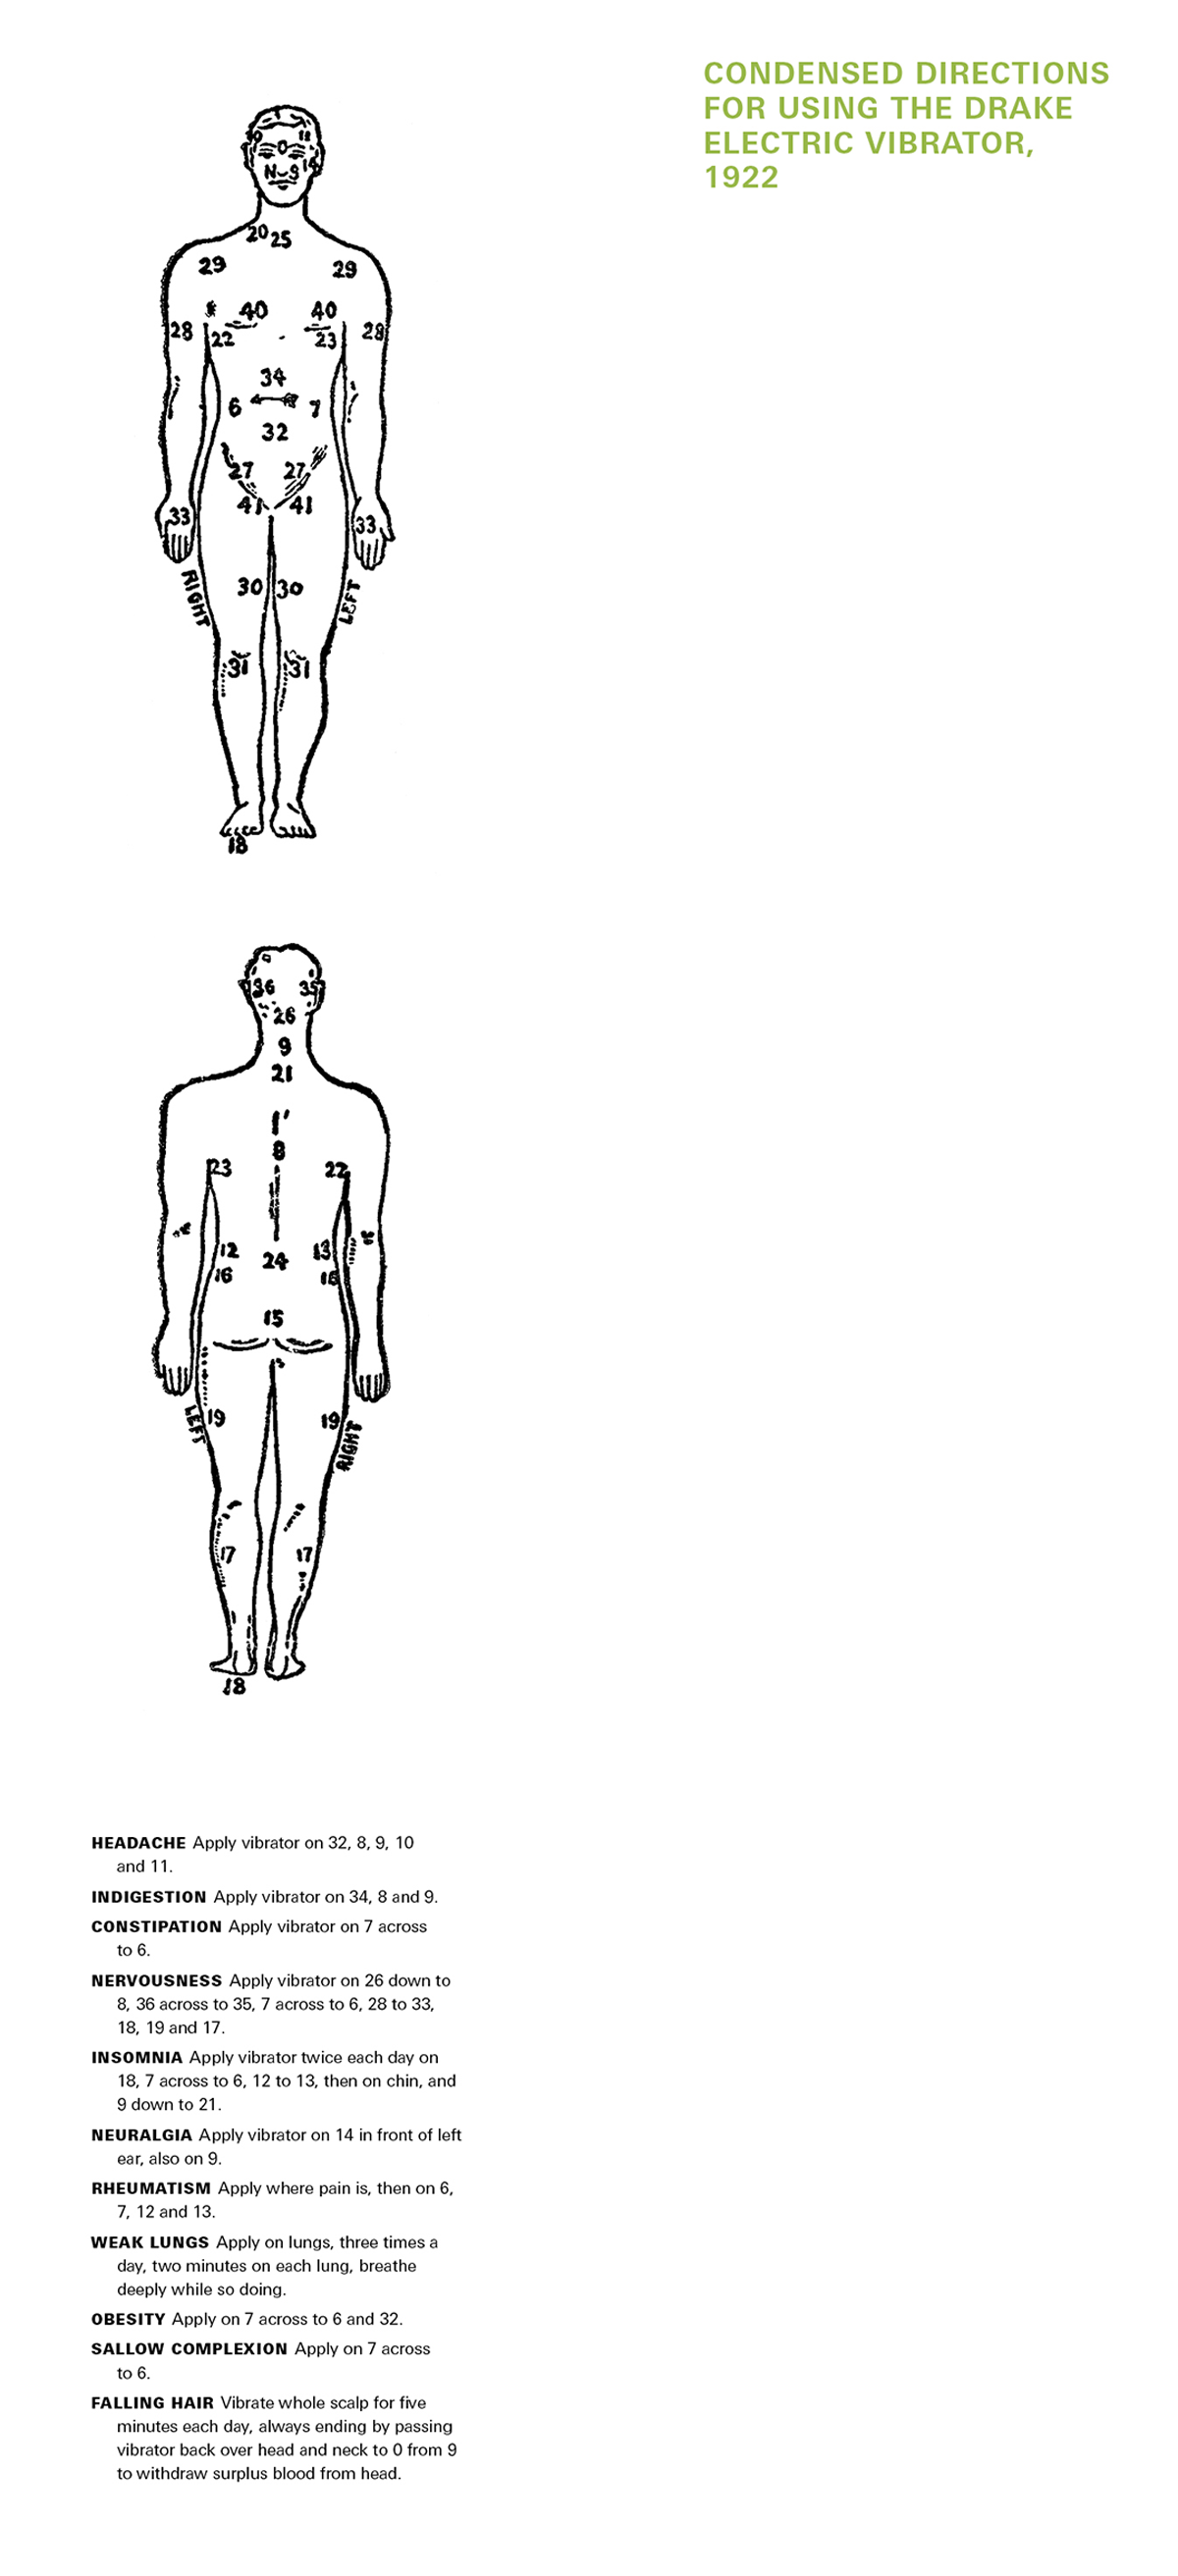 Two images: The front of this issue’s bookmark featuring diagrams of the front and back of a man’s body with various parts of his anatomy numbered. The caption reads: “Headache. Apply vibrator on thirty two, eight, nine, ten, and eleven. Indigestion. Apply vibrator on thirty four, eight and nine. Constipation. Apply vibrator on seven across to six. Nervousness. Apply vibrator on twenty six down to eight, thirty six across to thirty five, seven across to six, twenty eight to thirty three, eighteen, nineteen and seventeen. Insomnia. Apply vibrator twice each day on eighteen, seven across to six, twelve to thirteen, then on chin, and nine down to twenty one. Neuralgia. Apply vibrator on fourteen in front of left ear, also on nine. Rheumatism. Apply where pain is, then on six, seven, twelve and thirteen. Weak Lungs. Apply on lungs, three times a day, two minutes on each lung, breathe deeply while so doing. Obesity. Apply on seven across to six and thirty two. Sallow Complexion. Apply on seven across to six. Falling hair. Vibrate whole scalp for five minutes each day, always ending by passing vibrator back over head and neck from zero to nine to withdraw surplus blood from head.” And the back of this issue's bookmark, with the legend “Condensed Directions for Using the Drake Electric Vibrator, nineteen twenty-two.